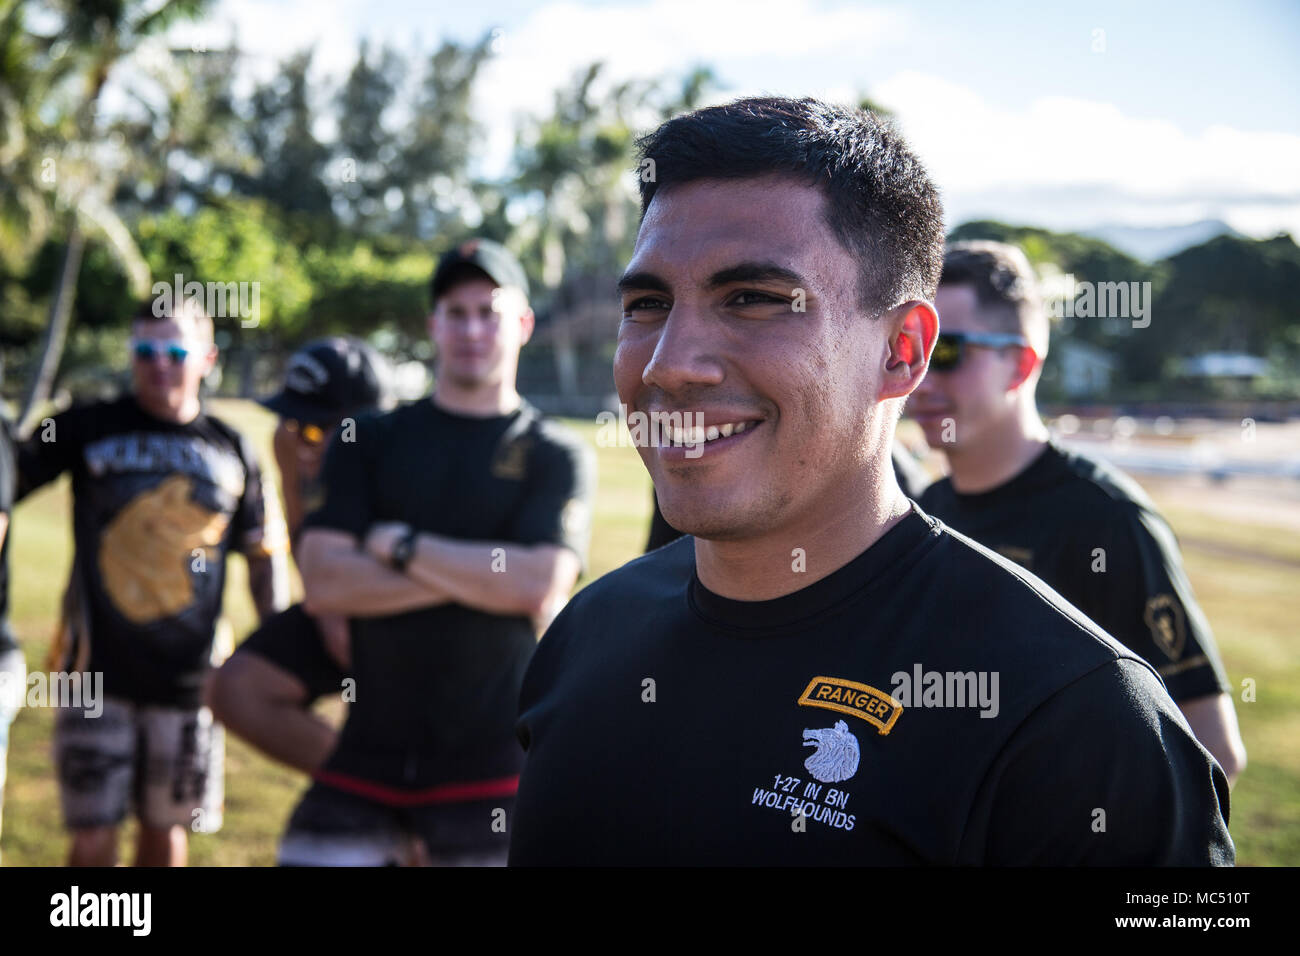 U.S. Army Capt. David Zelaya, assigned to 1st Battalion, 27th Infantry Regiment, 2nd Infantry Brigade Combat Team, 25th Infantry Division listens to group introductions before the start of the team-building exercise in Keehi Lagoon, Honolulu, Hi., Jan. 30, 2018. In an effort to strengthen international relationships, United States Army Pacific hosted personnel from the British Army to participate in a team building exercise facilitating outrigger canoeing. (U.S. Army photo by 1st. Lt. Ryan DeBooy) Stock Photo